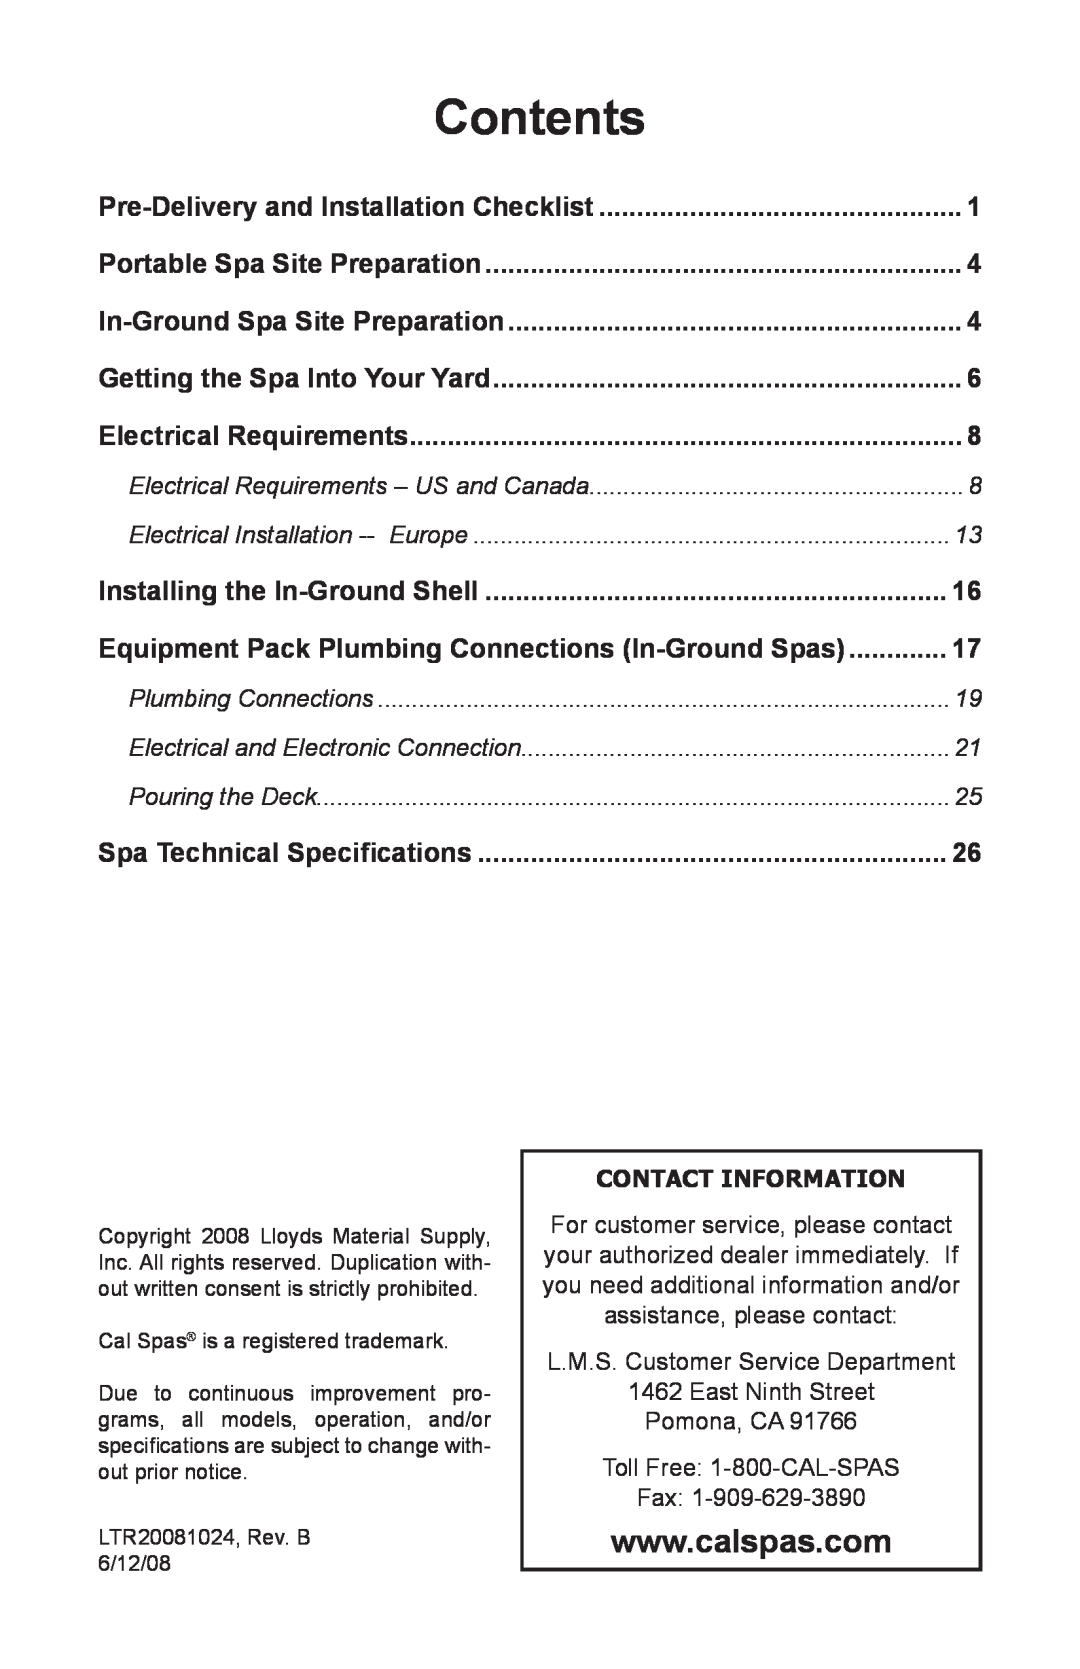 Cal Spas A826L, A857B Contents, Equipment Pack Plumbing Connections In-GroundSpas, Pre-Deliveryand Installation Checklist 